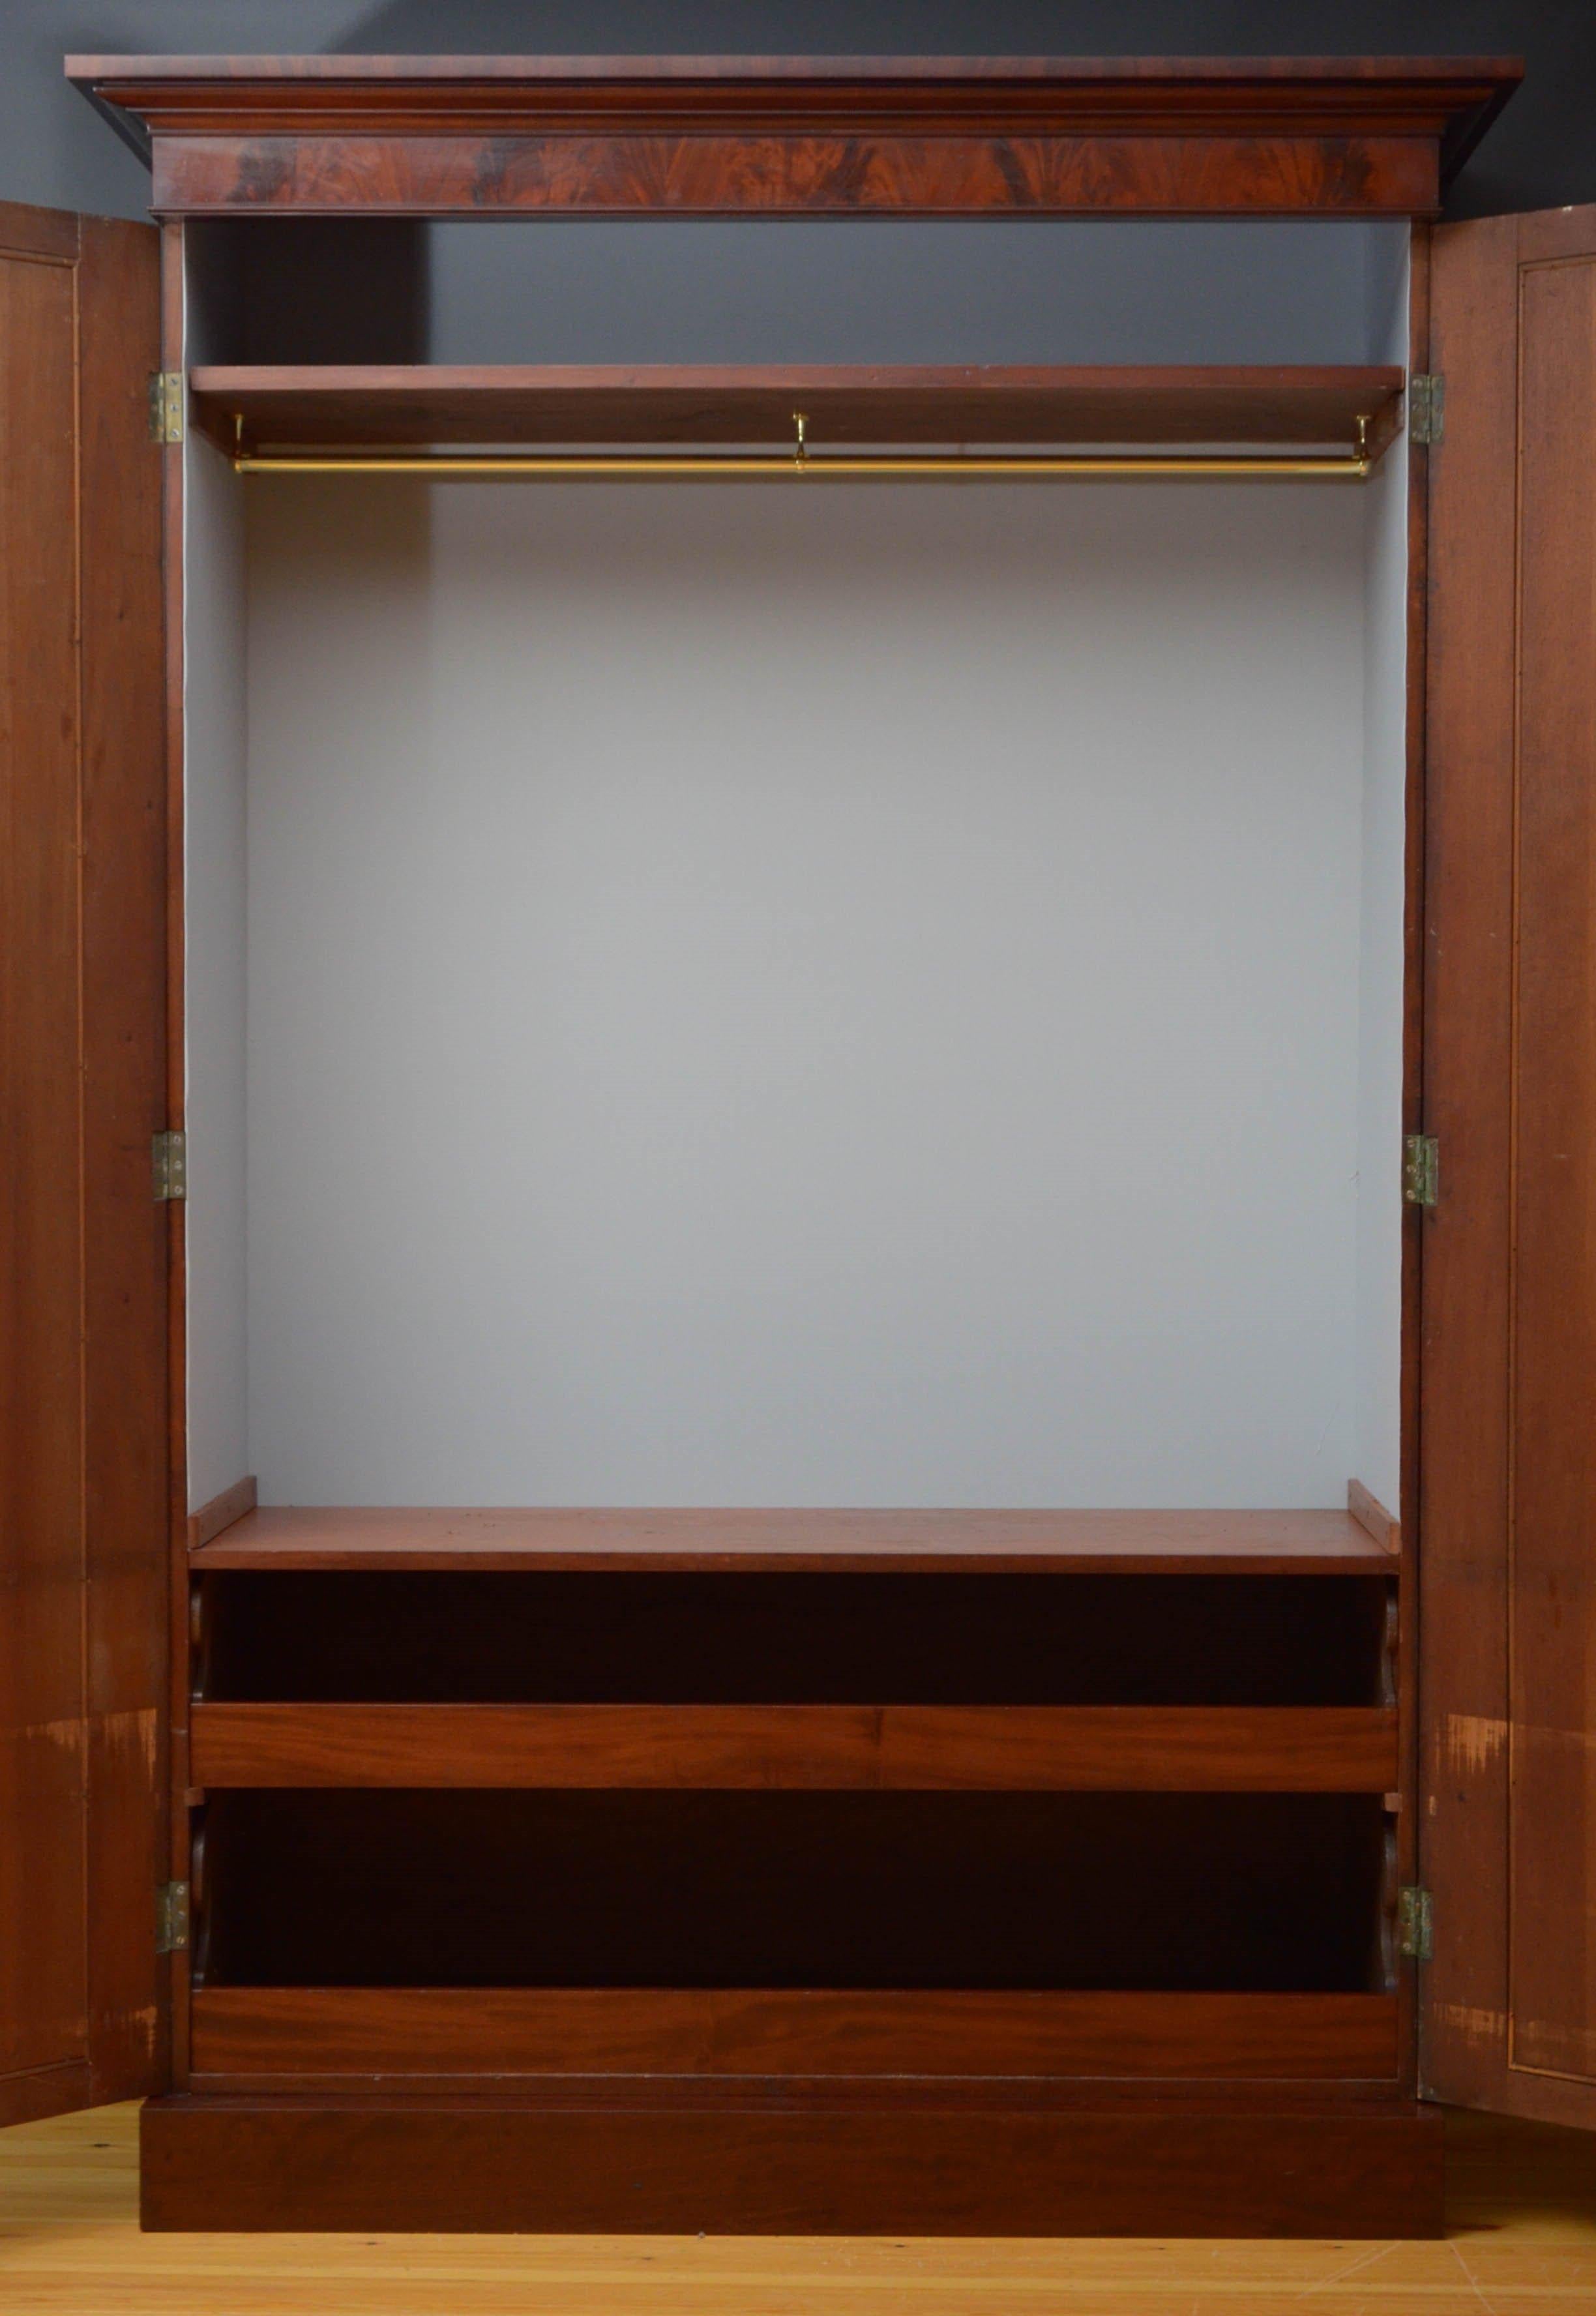 Sn4867, superb William IV, two-door wardrobe in mahogany, having cavetto cornice above a pair of flamed mahogany doors with arched mouldings, fitted with original working lock and a key and enclosing shelf, hanging space and 2 sliders, all flanked